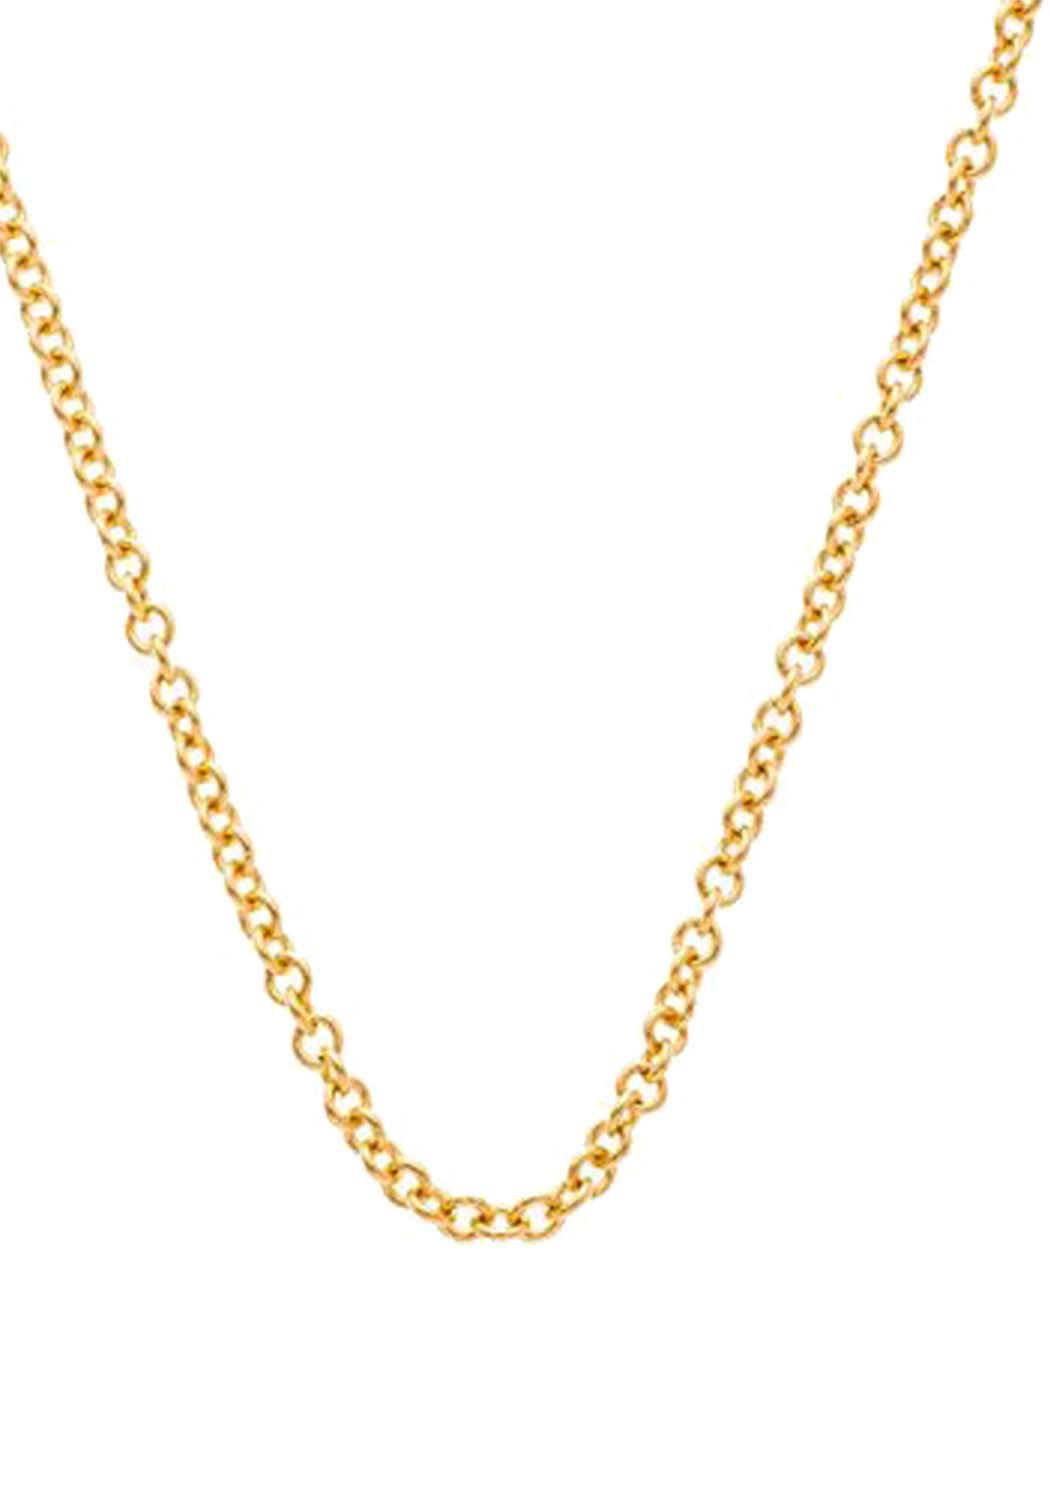 Sethi Couture 18K Yellow Gold Small Oval Link Chain Necklace | GC-YGOV-SM-18 | OsterJewelers.com